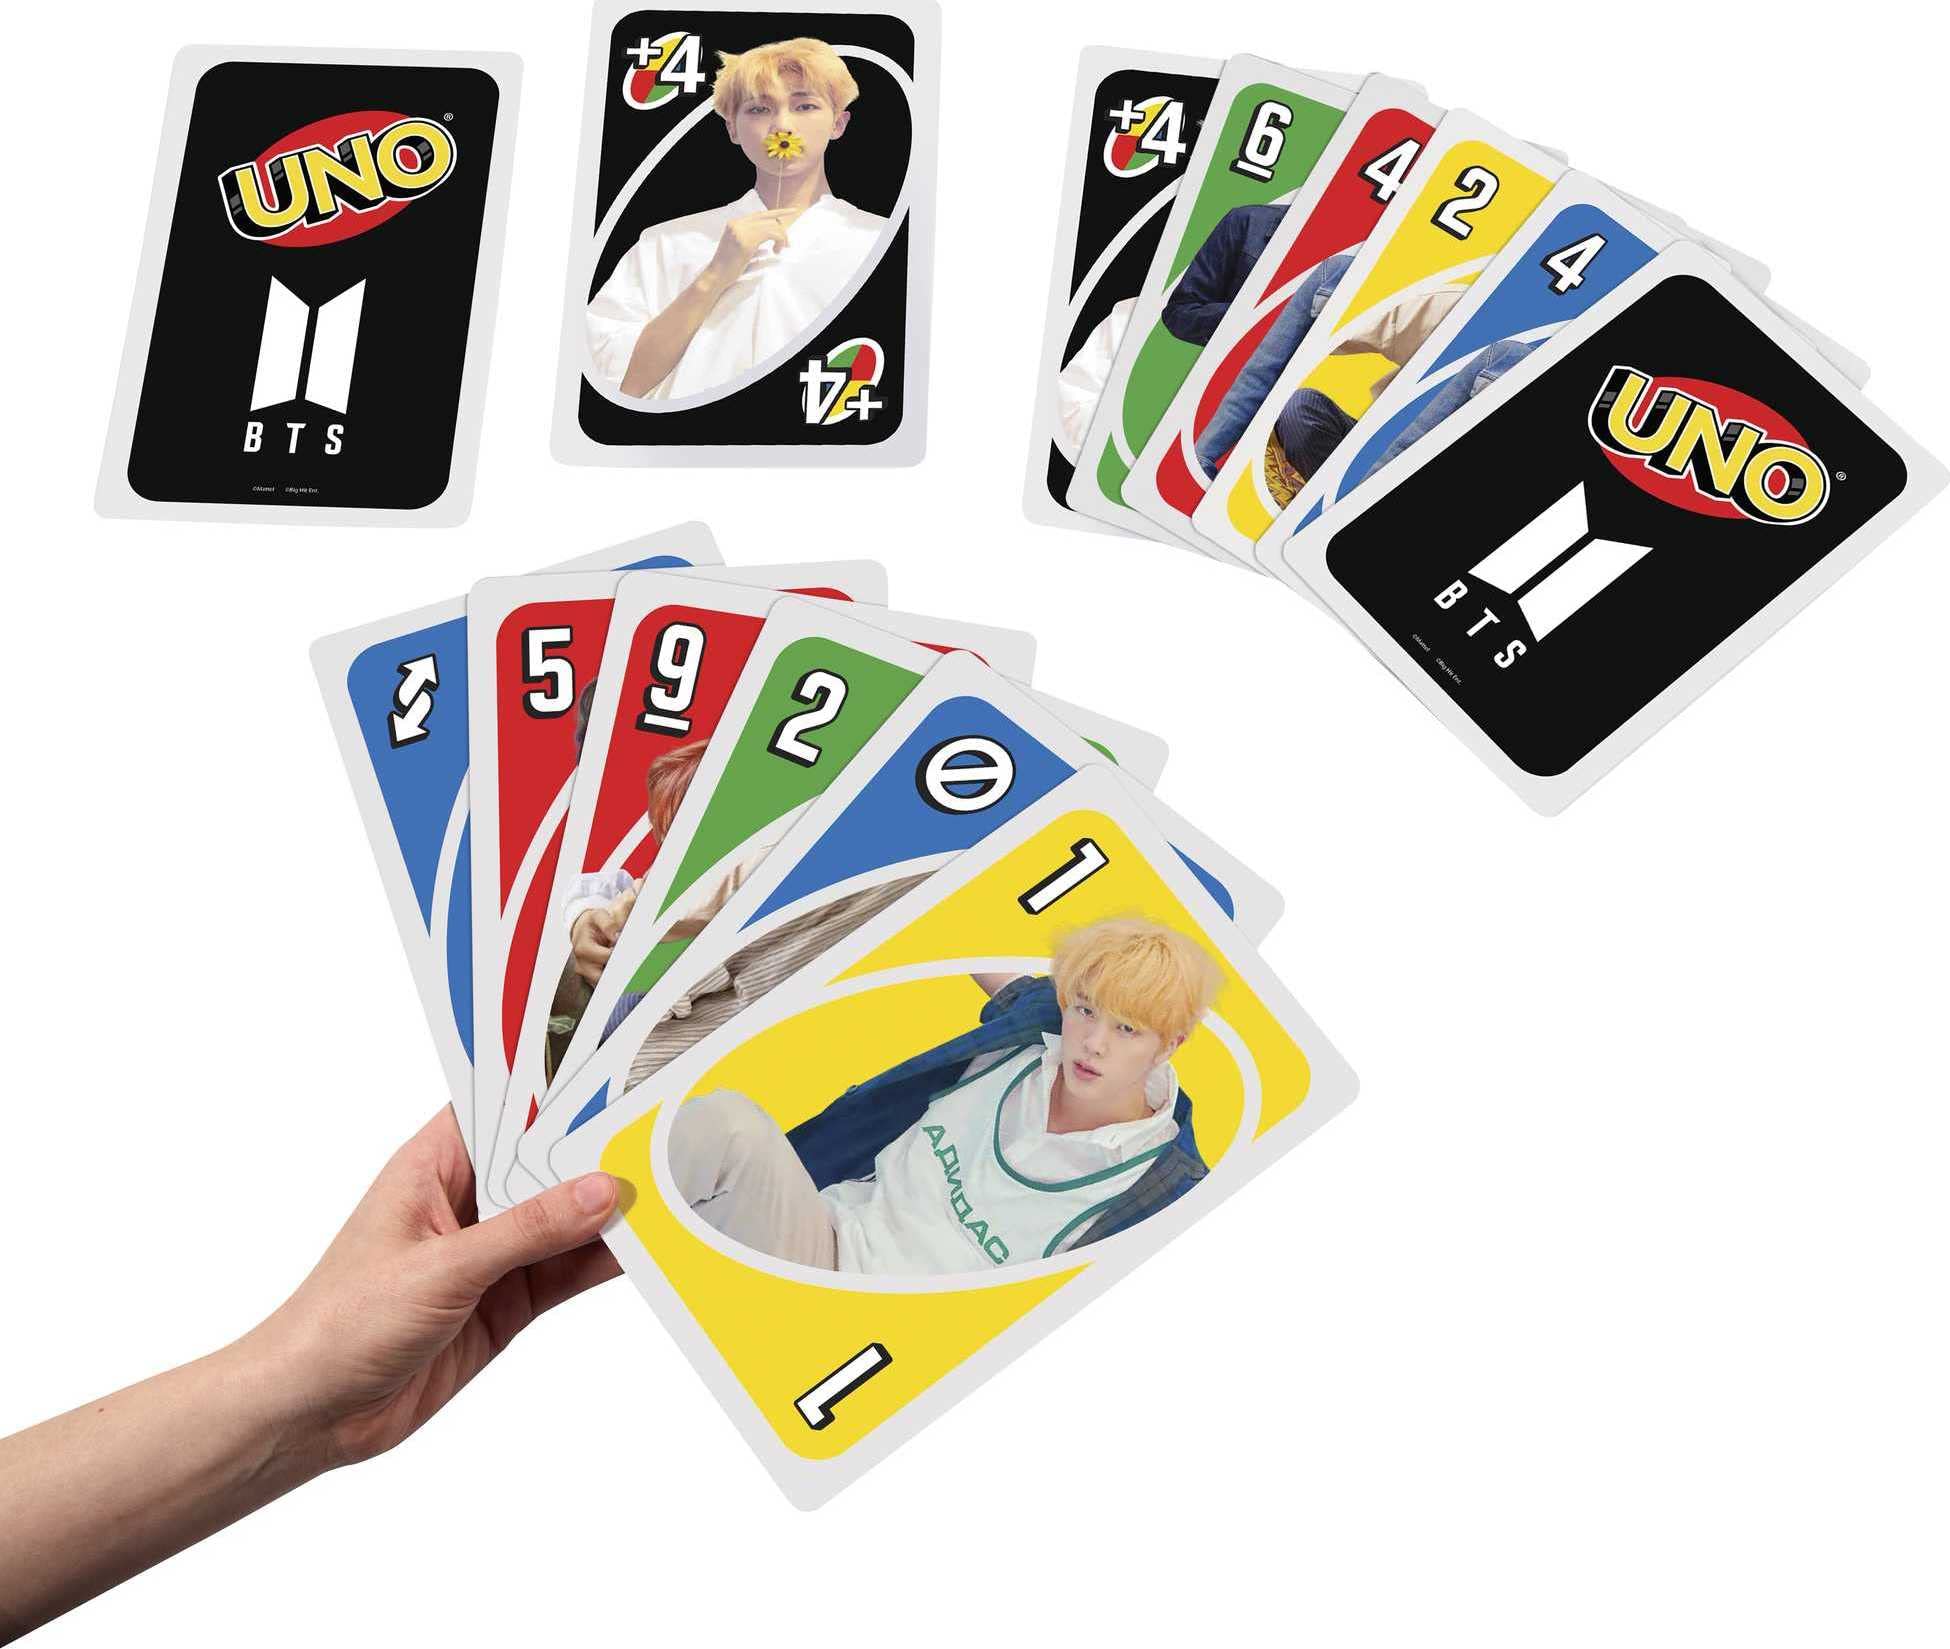 Mattel Games Giant UNO BTS Card Game with 108 Cards Based on BTS Global Superstars Global Boy Band, Gift for Boys and Girls Age 